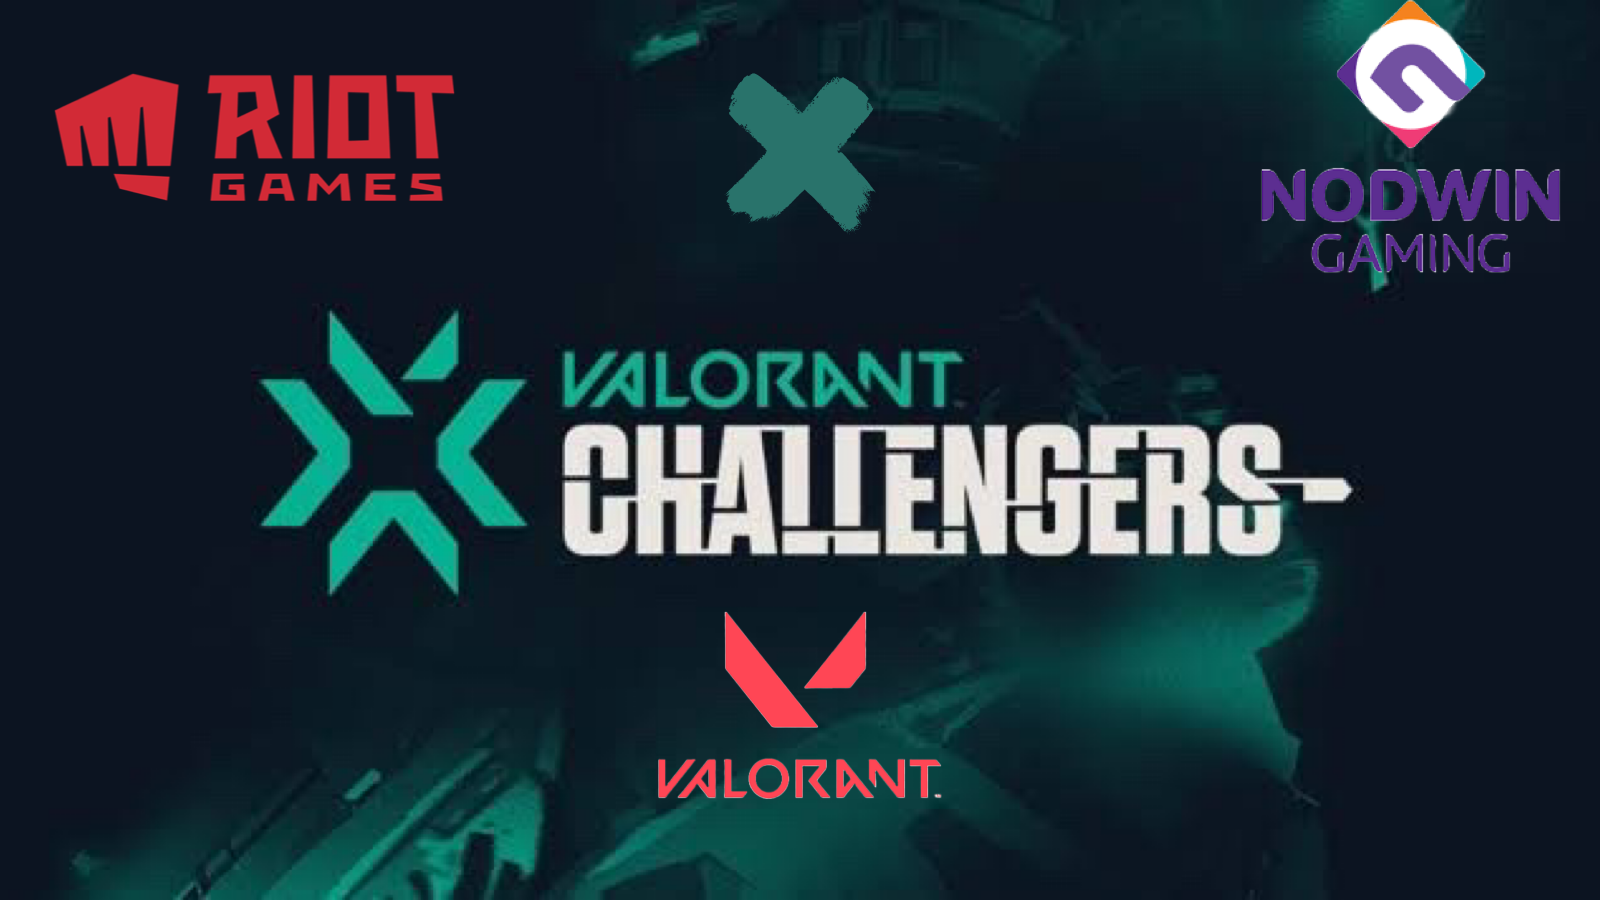 Riot Games and NODWIN Gaming Join Forces for South Asia’s Most Anticipated VALORANT League